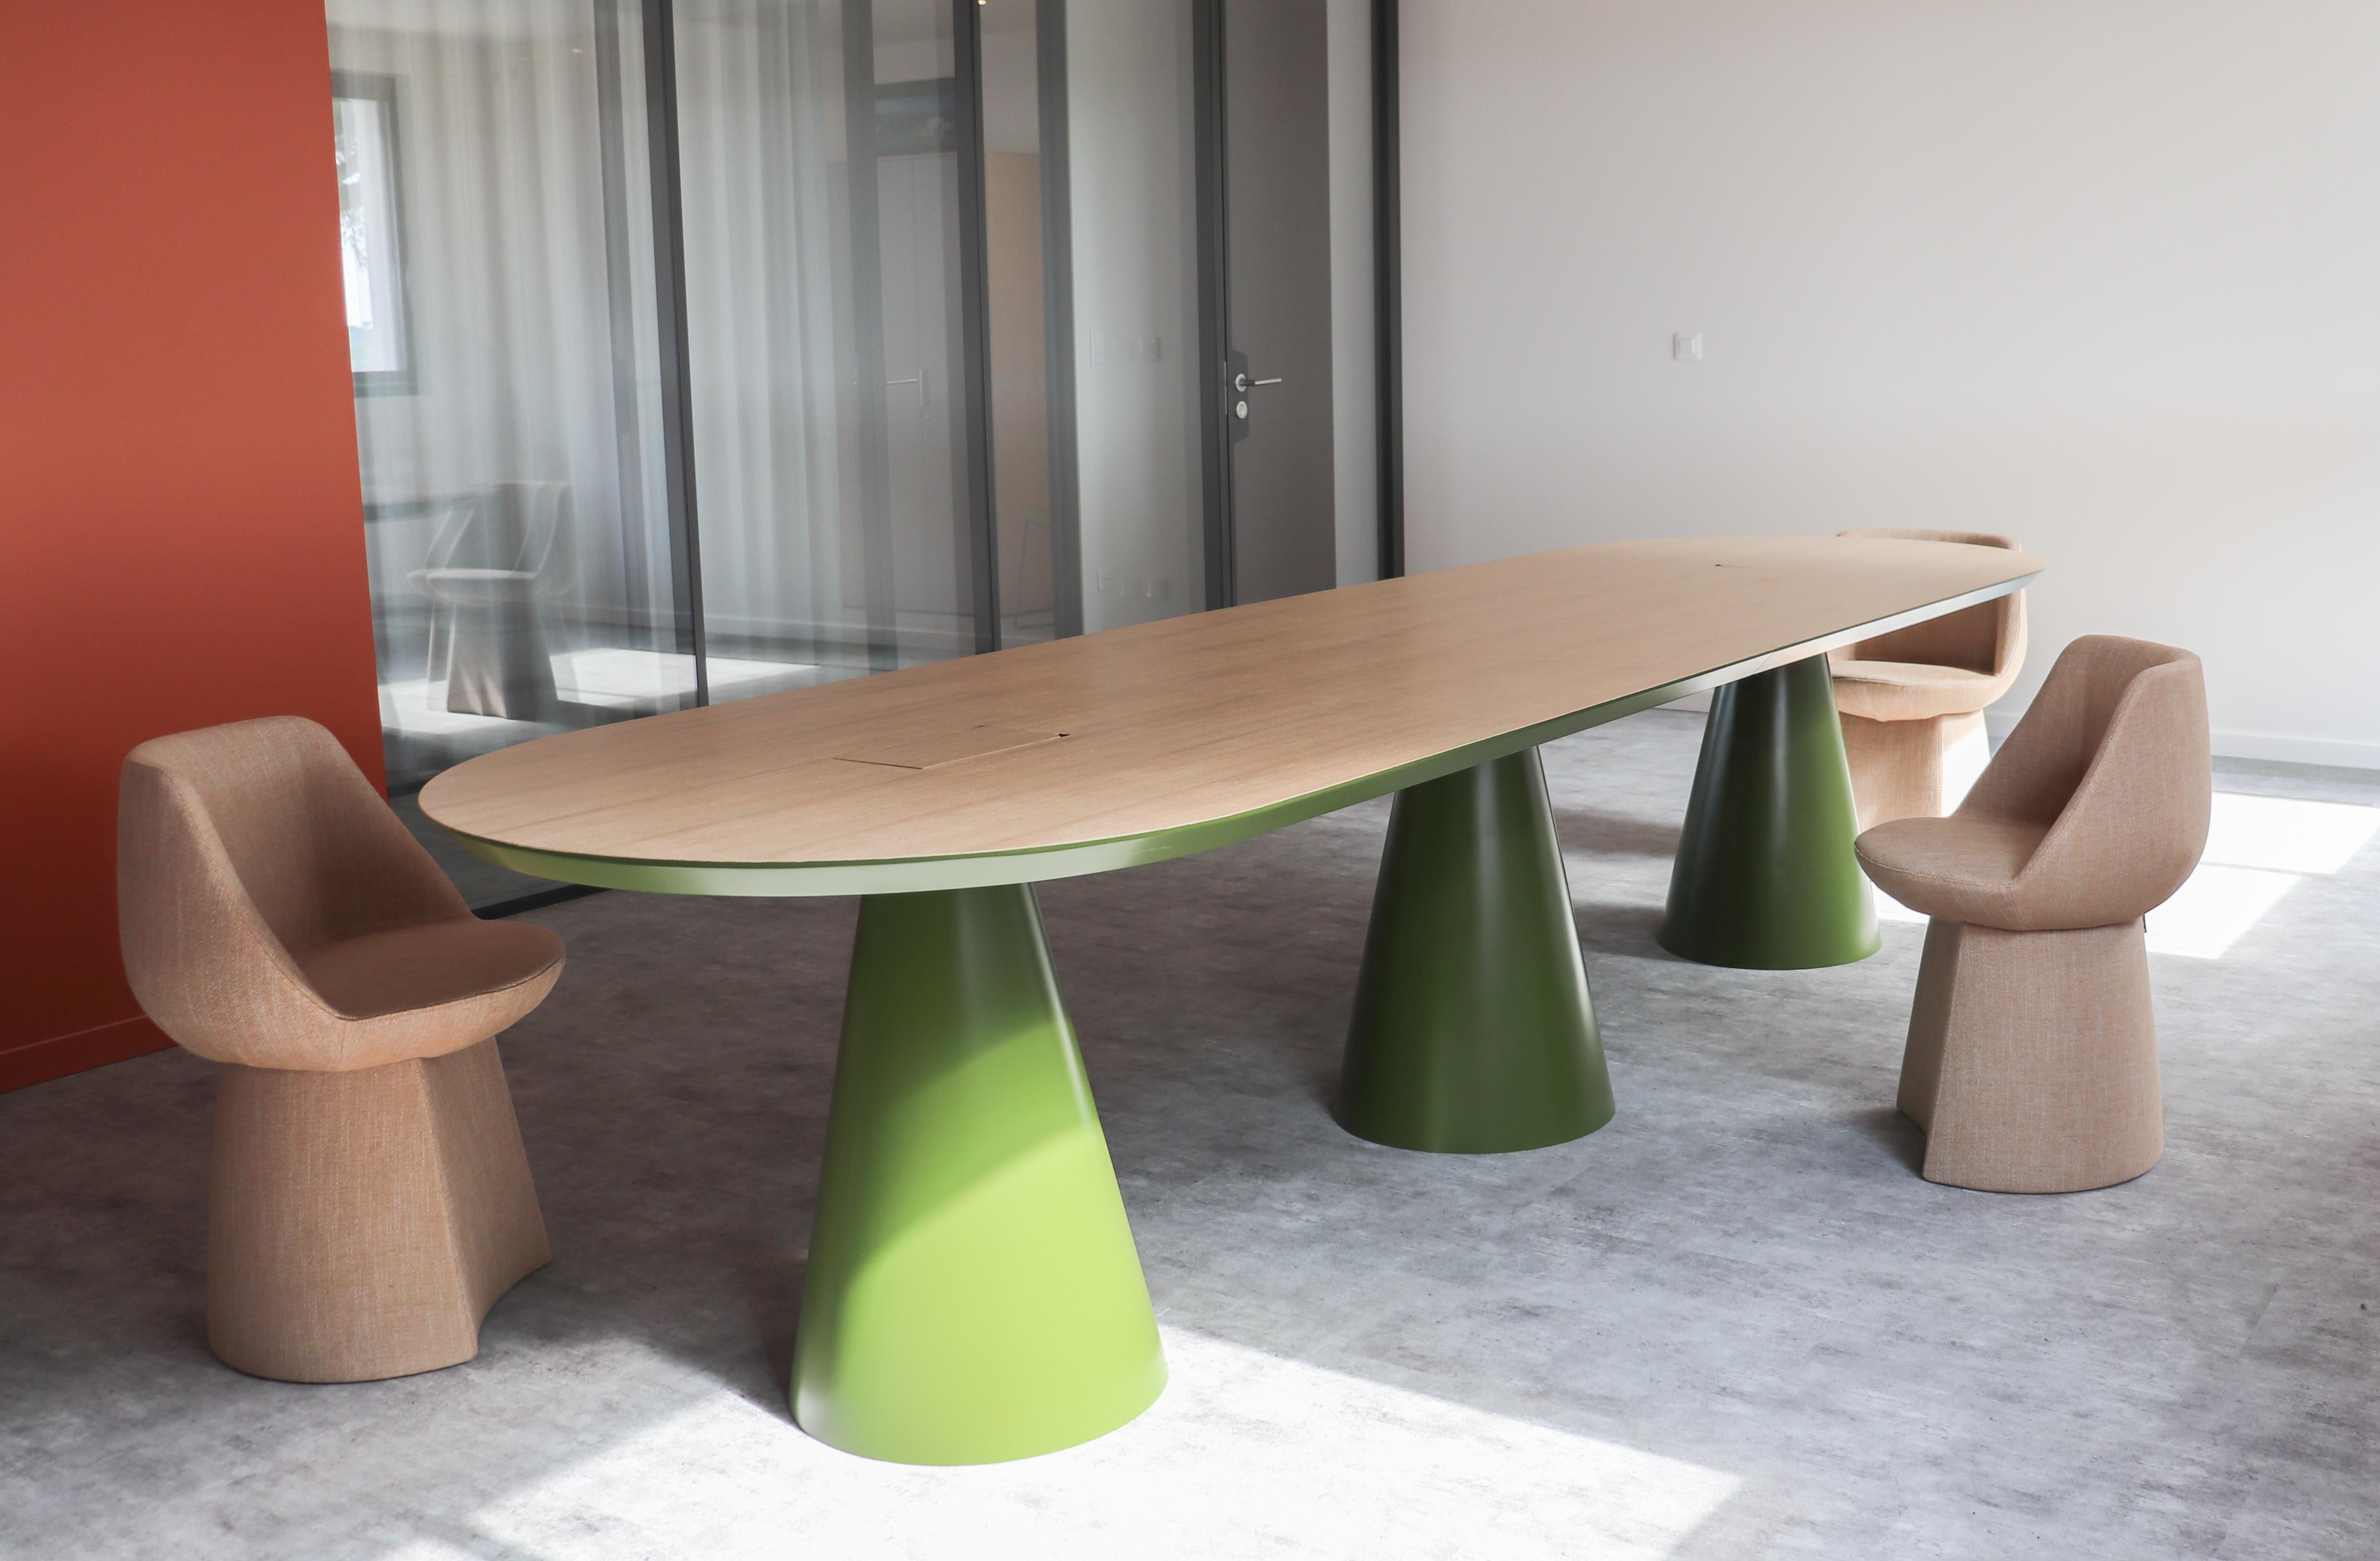 Unique Senventies Meeting Table Signed by Gigi Design
Dimensions: D350 x W100 x H74 cm
Materials: Olive green lacquer, natural oak veneer top

Hidden HDMI, USB jacks.
A desire for retro and to dive into the furniture of the 70s.
The three legs and